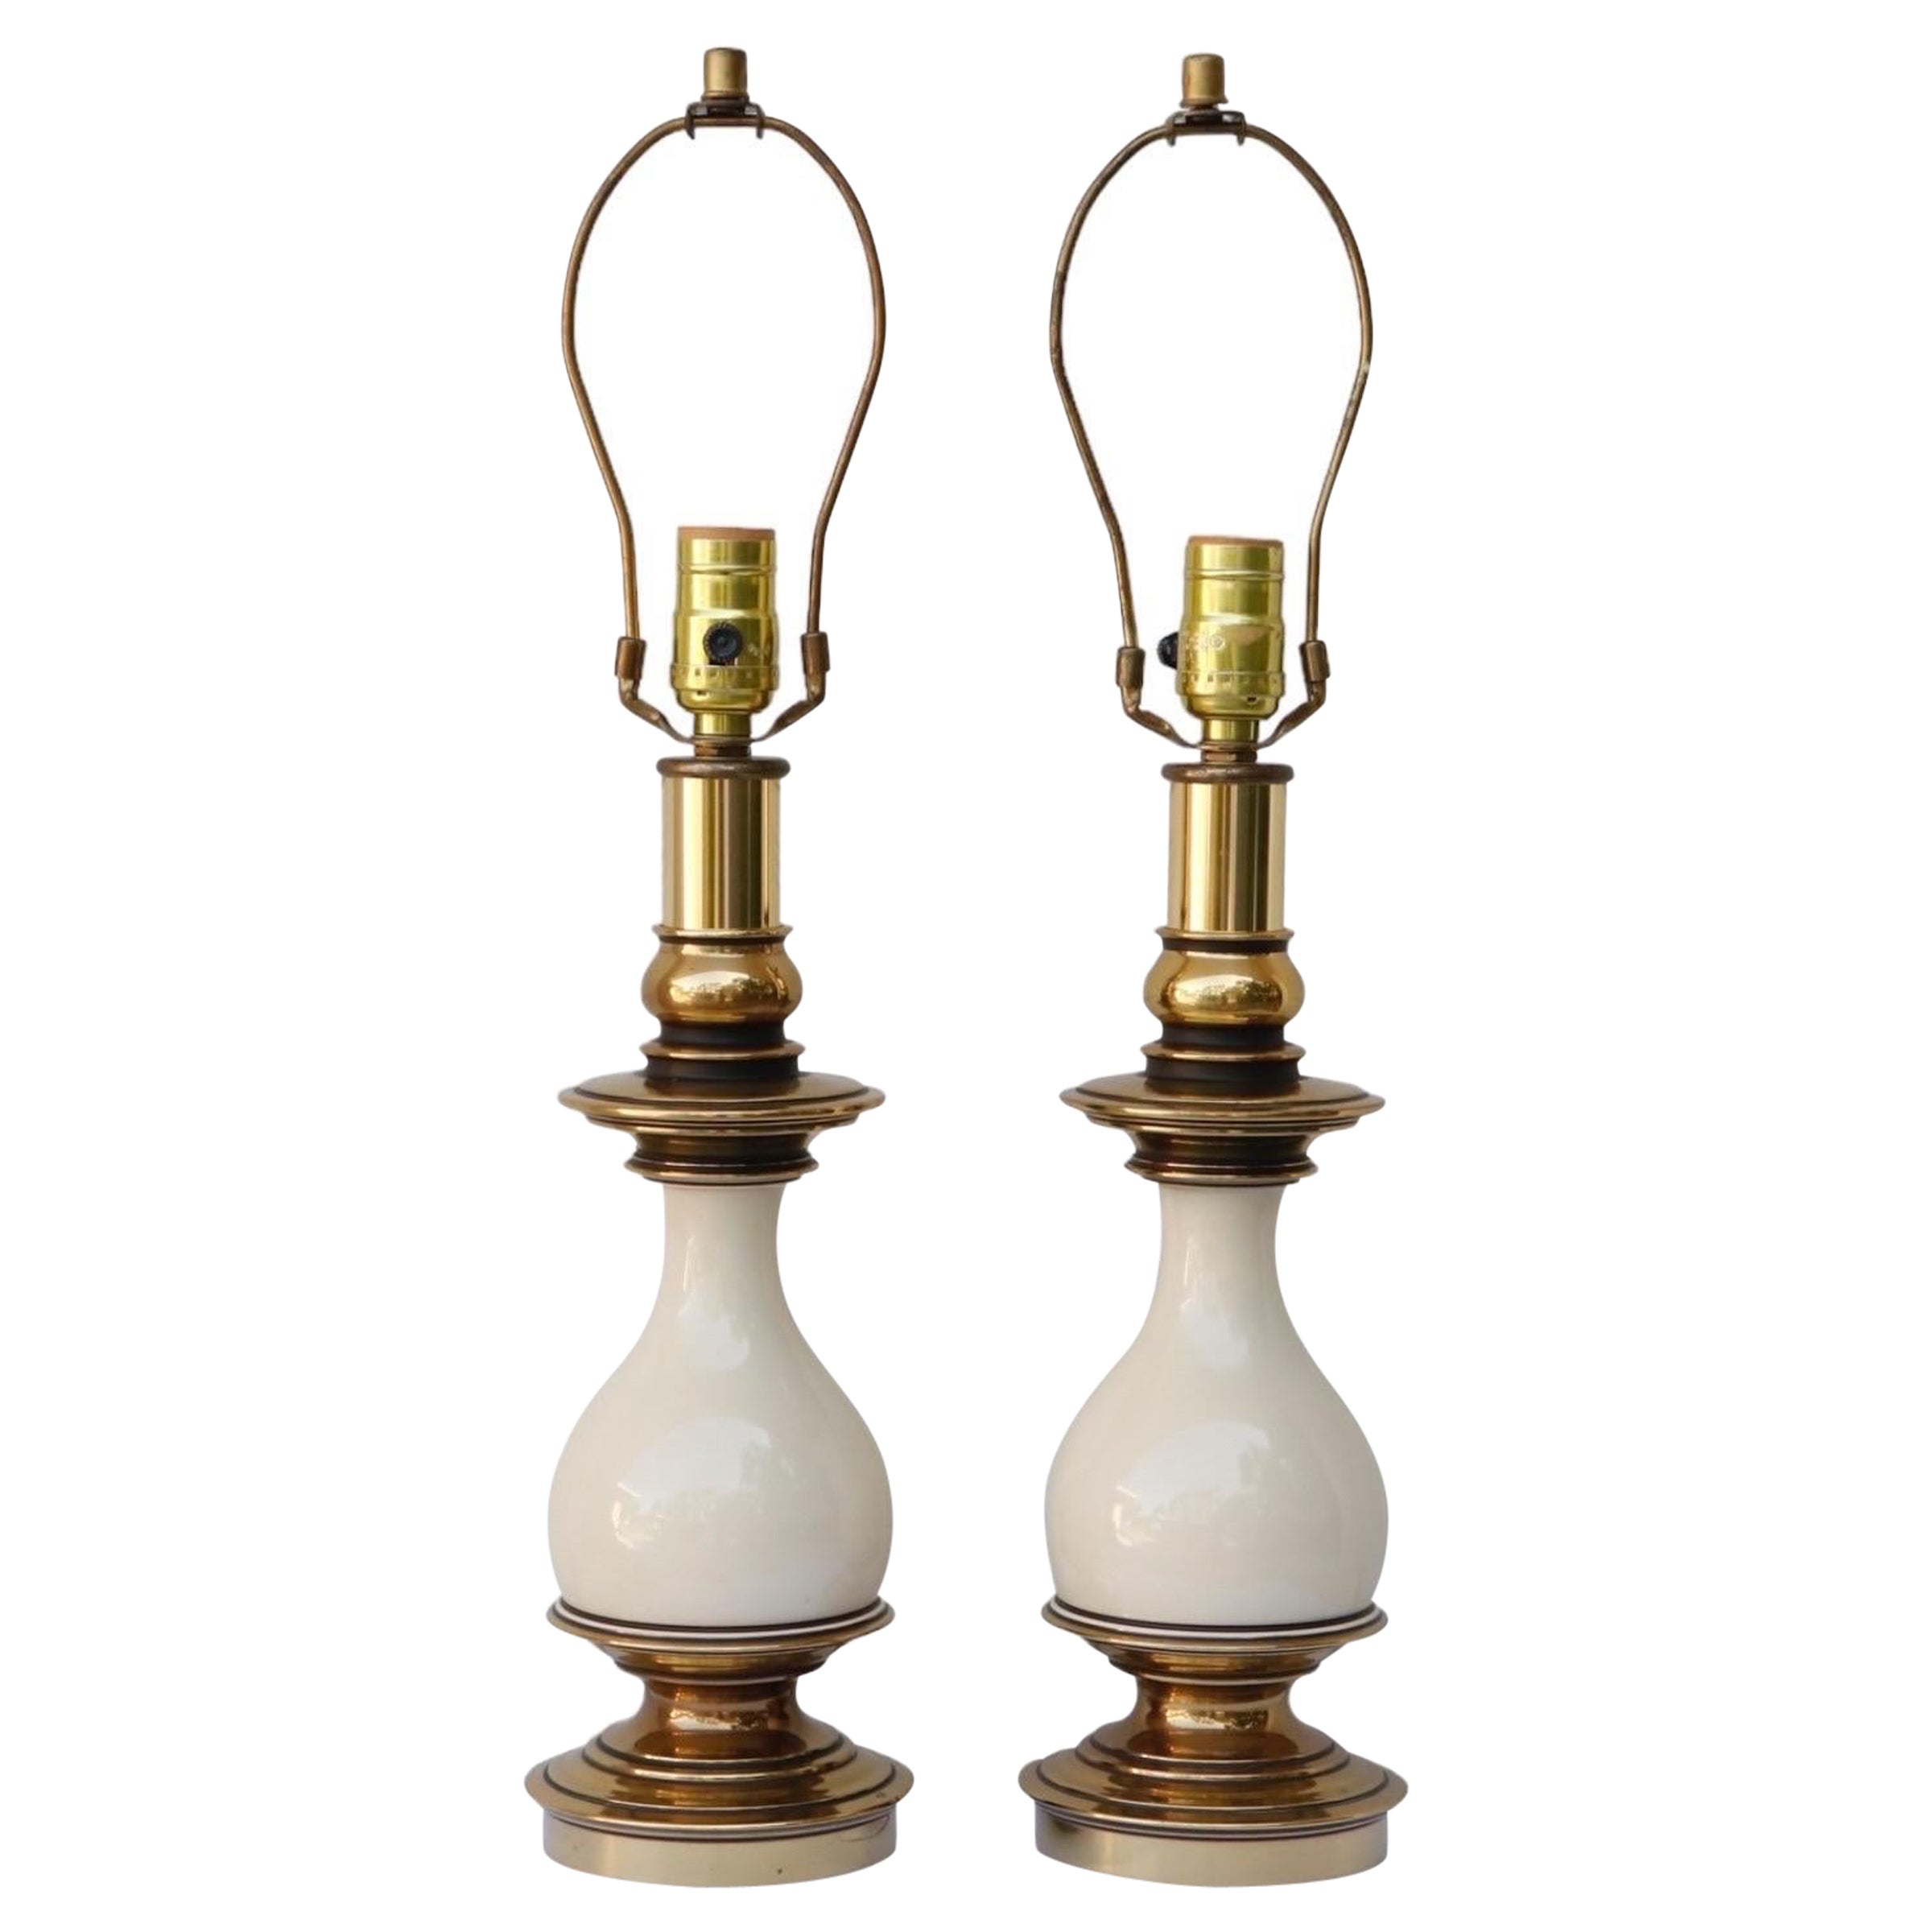 Brass & Enamel Table Lamps by Stiffel - a Pair For Sale